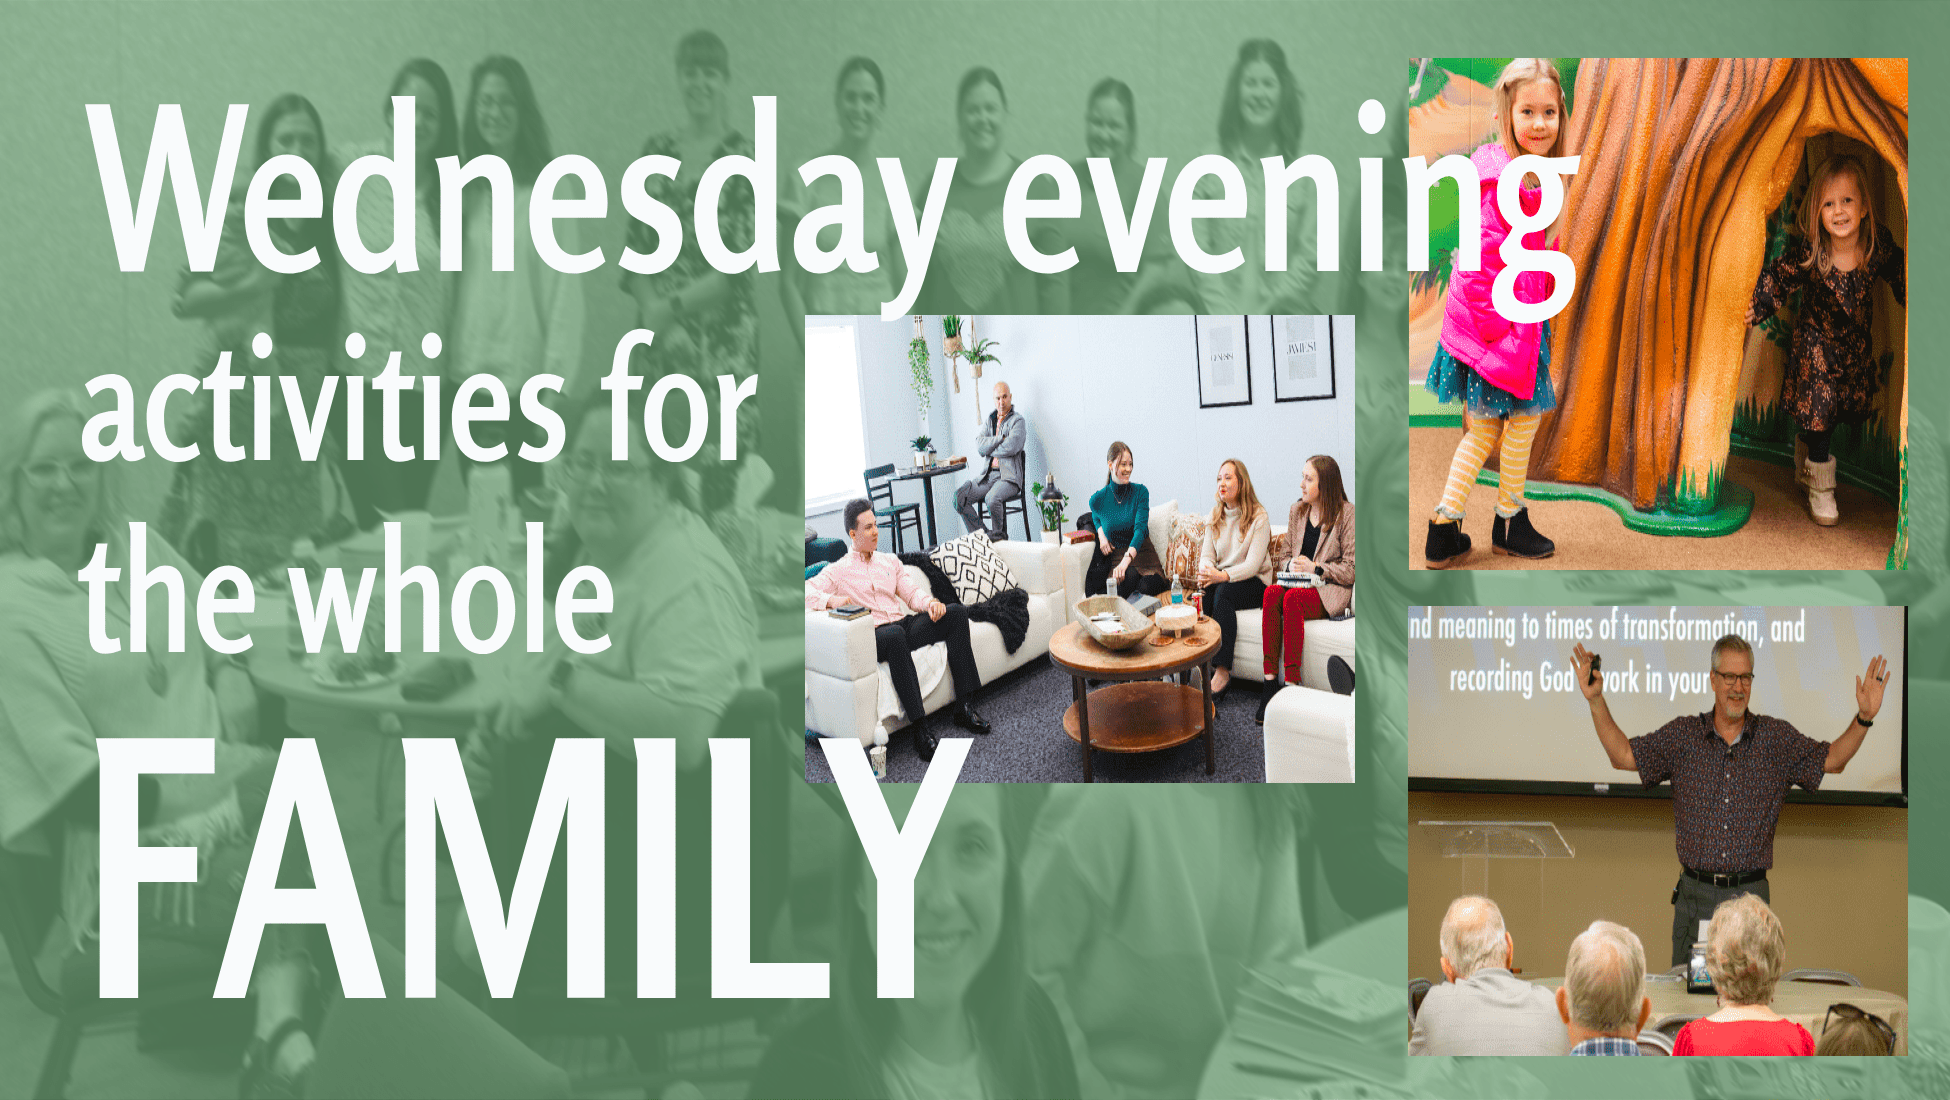 Wed activities for the whole family